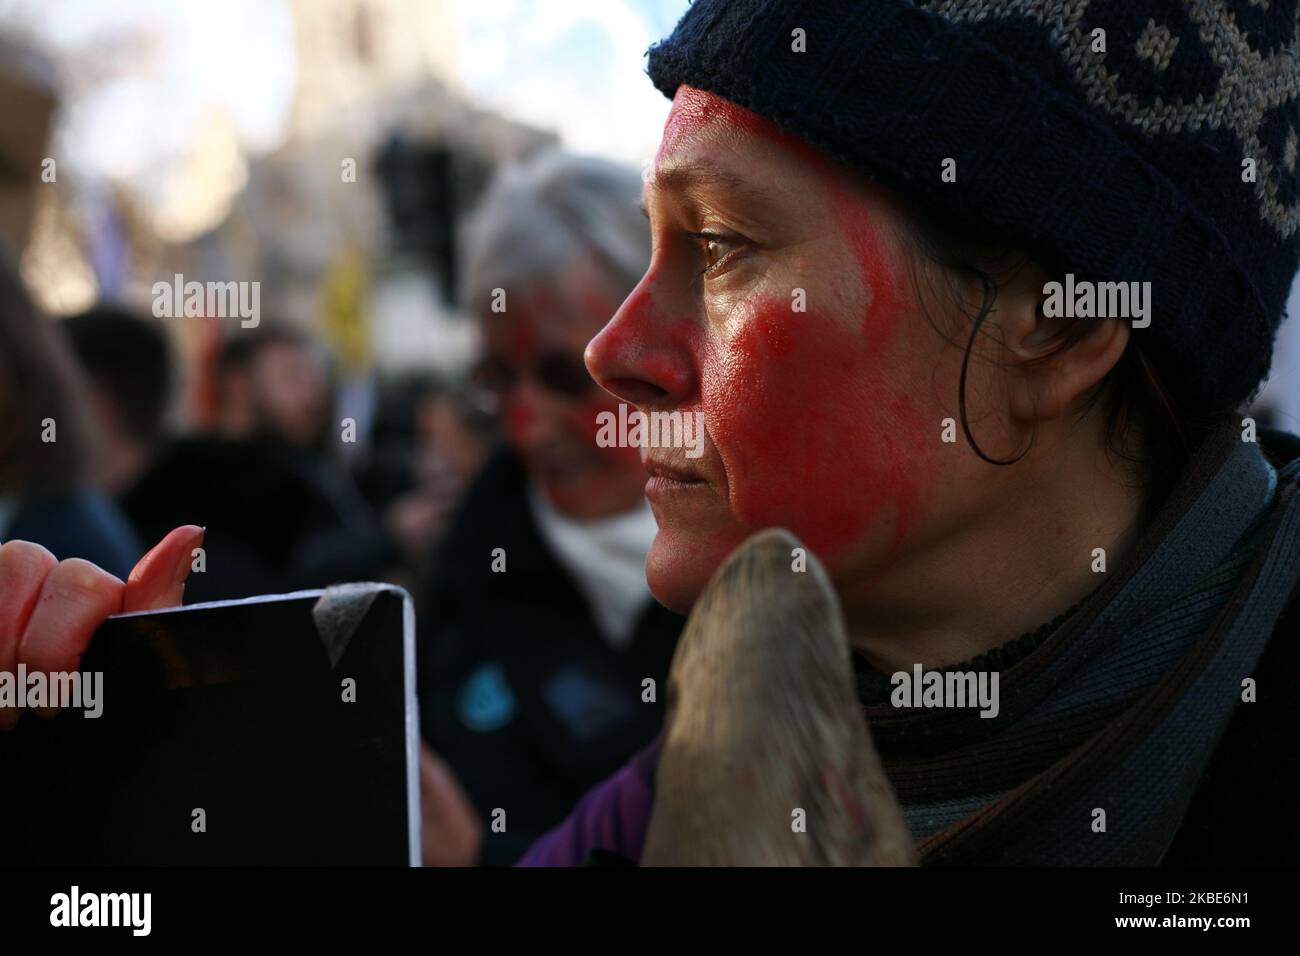 A member of climate change activist movement Extinction Rebellion (XR) protests against kangaroo killing during an XR-organised demonstration against the Australian government's response to its ongoing bushfires emergency held outside the Australian High Commission in London, England, on January 10, 2020. Wildfires have burned more than 12 million acres of Australian land since beginning in September last year, with the states of New South Wales and Victoria most severely affected, and with the fire season still far from over. Australian Prime Minister Scott Morrison is facing intense criticis Stock Photo